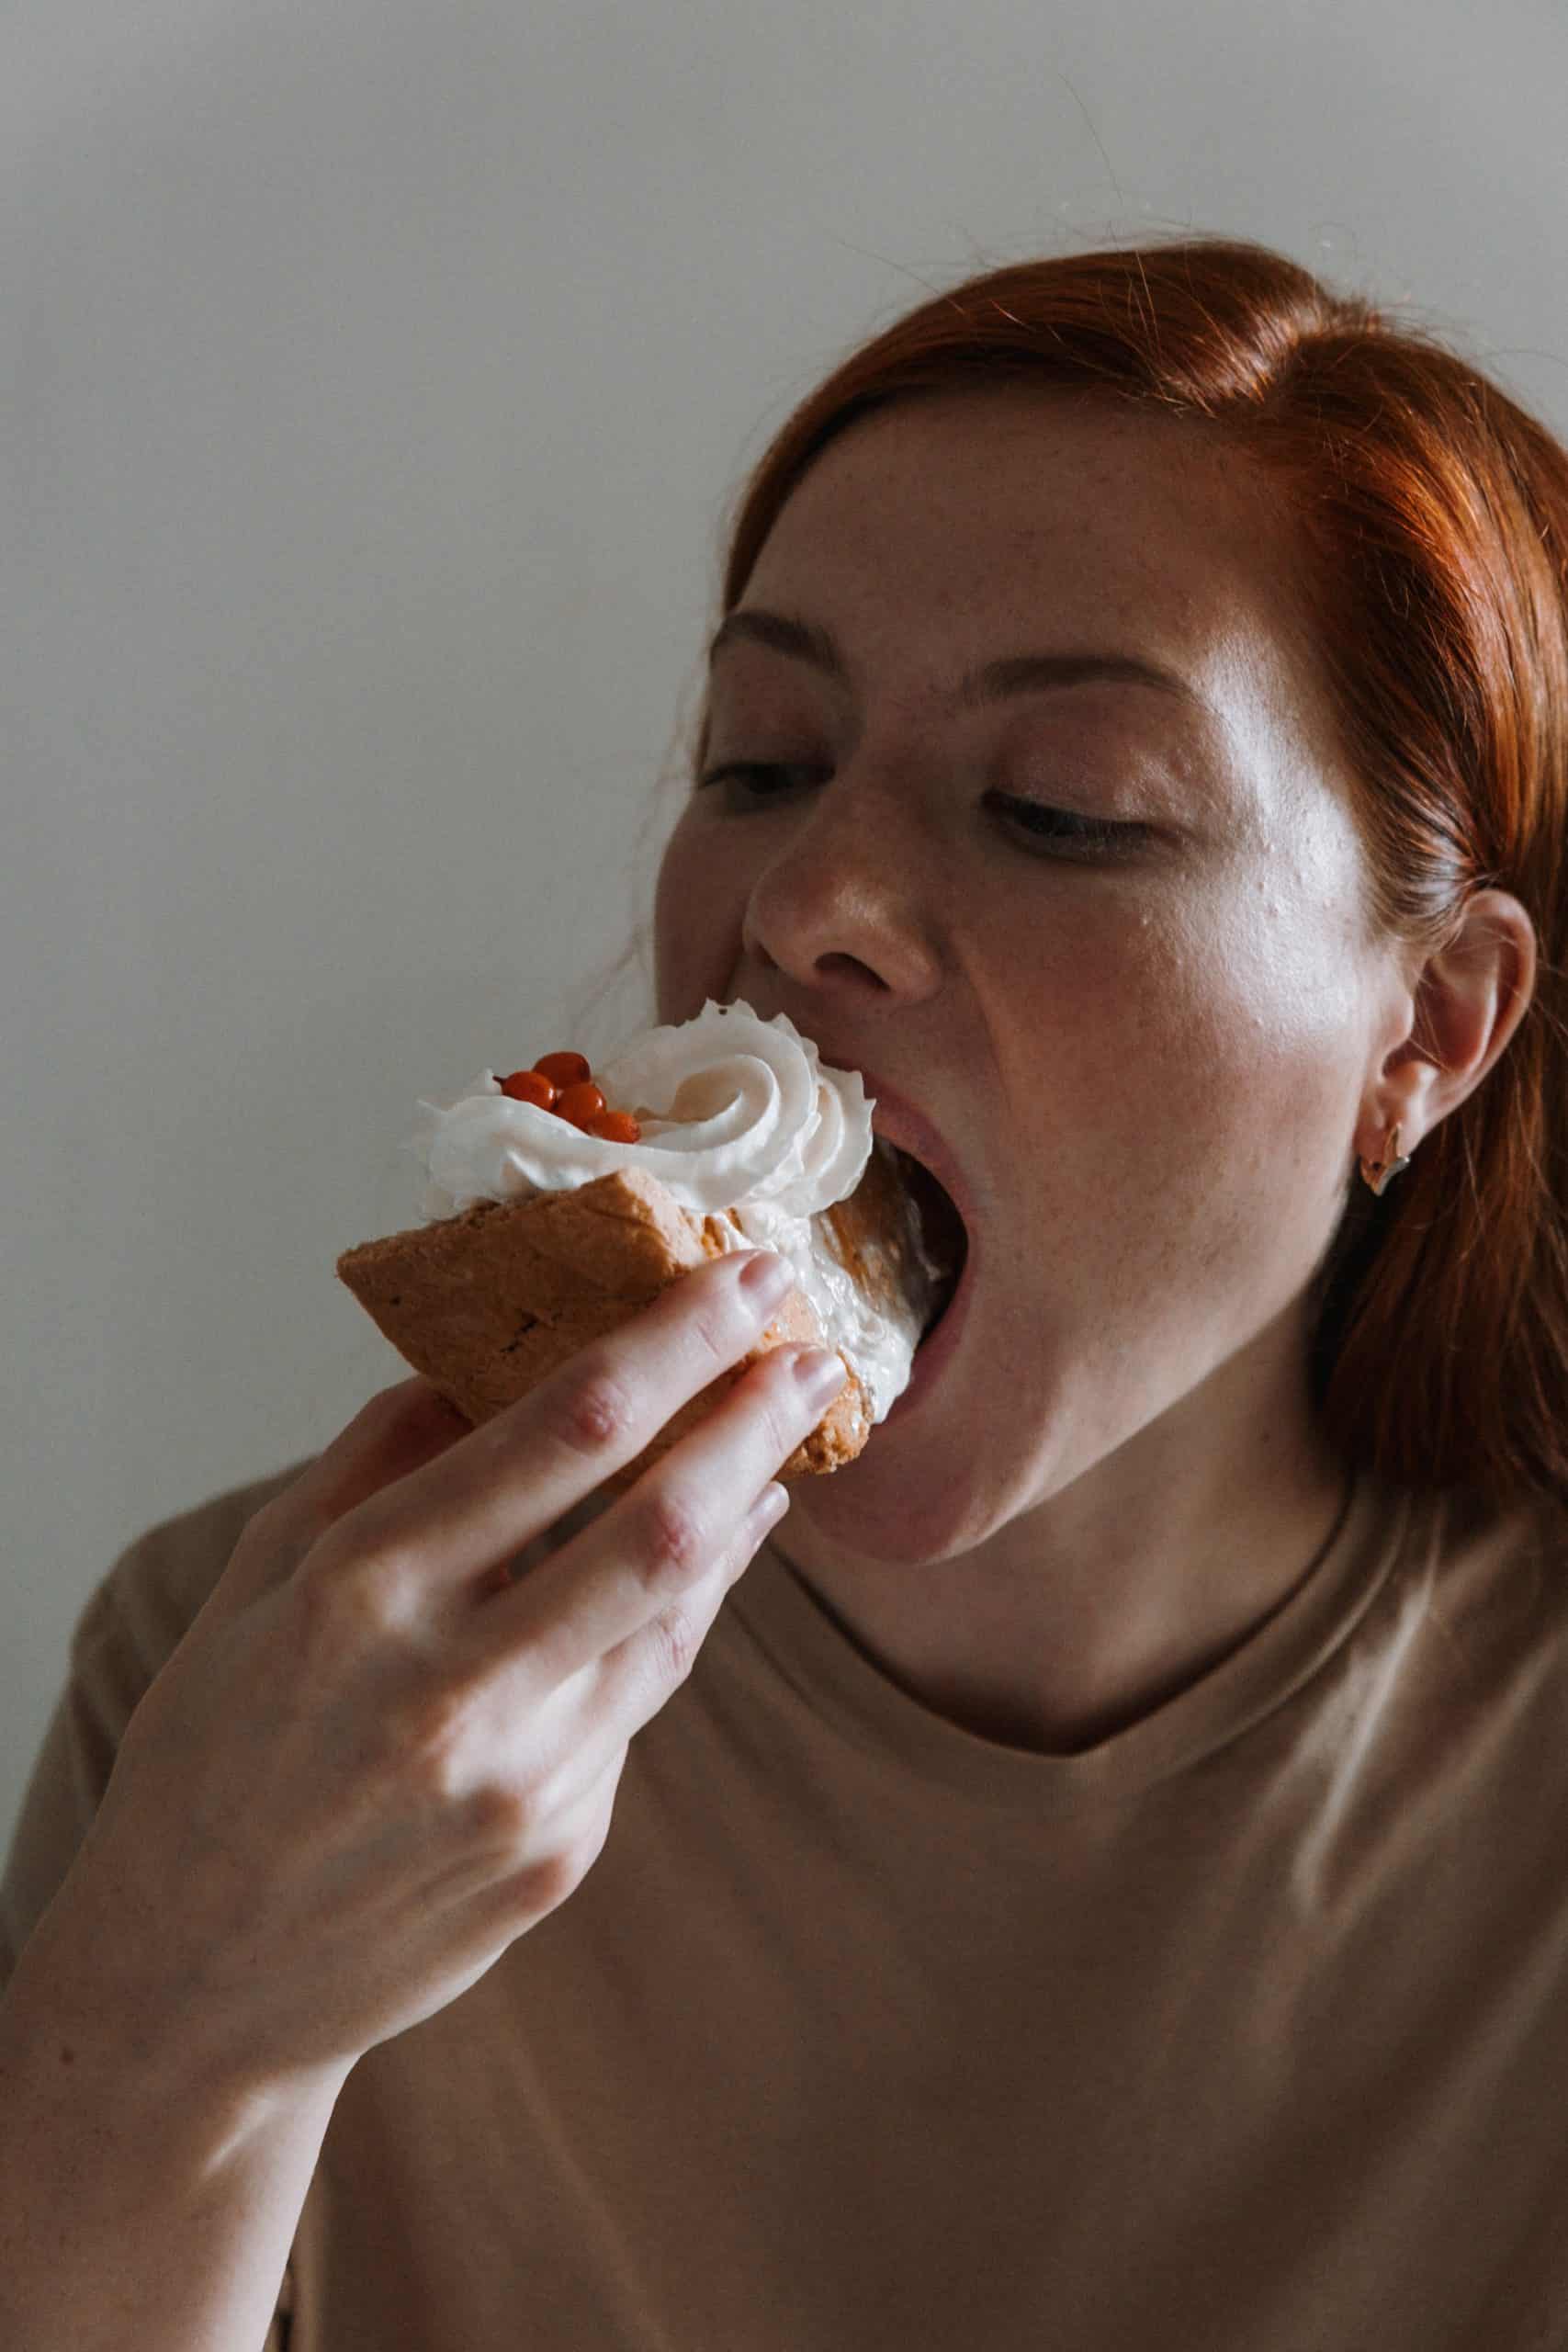 Loving food can be a challenge when trying to lose weight. Here are some tips on how to lose weight when you love food. Picture of a woman eating a large slice of pie.